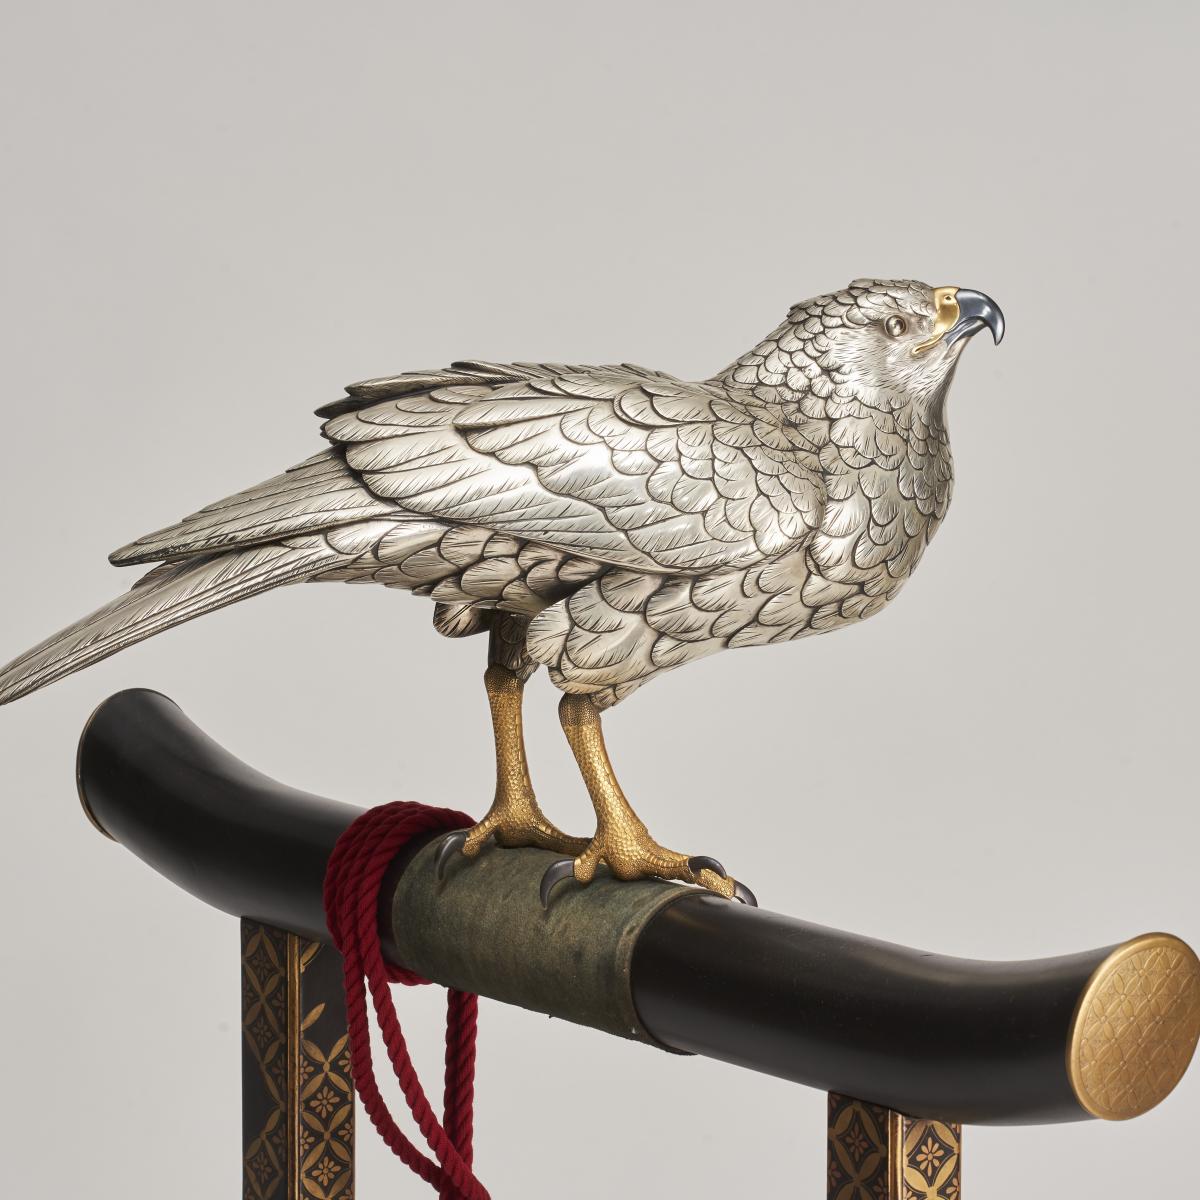 A majestic, life-size silvered Bronze Okimono of a Hawk on a superb lacquer stand, (Japanese Meiji-era)